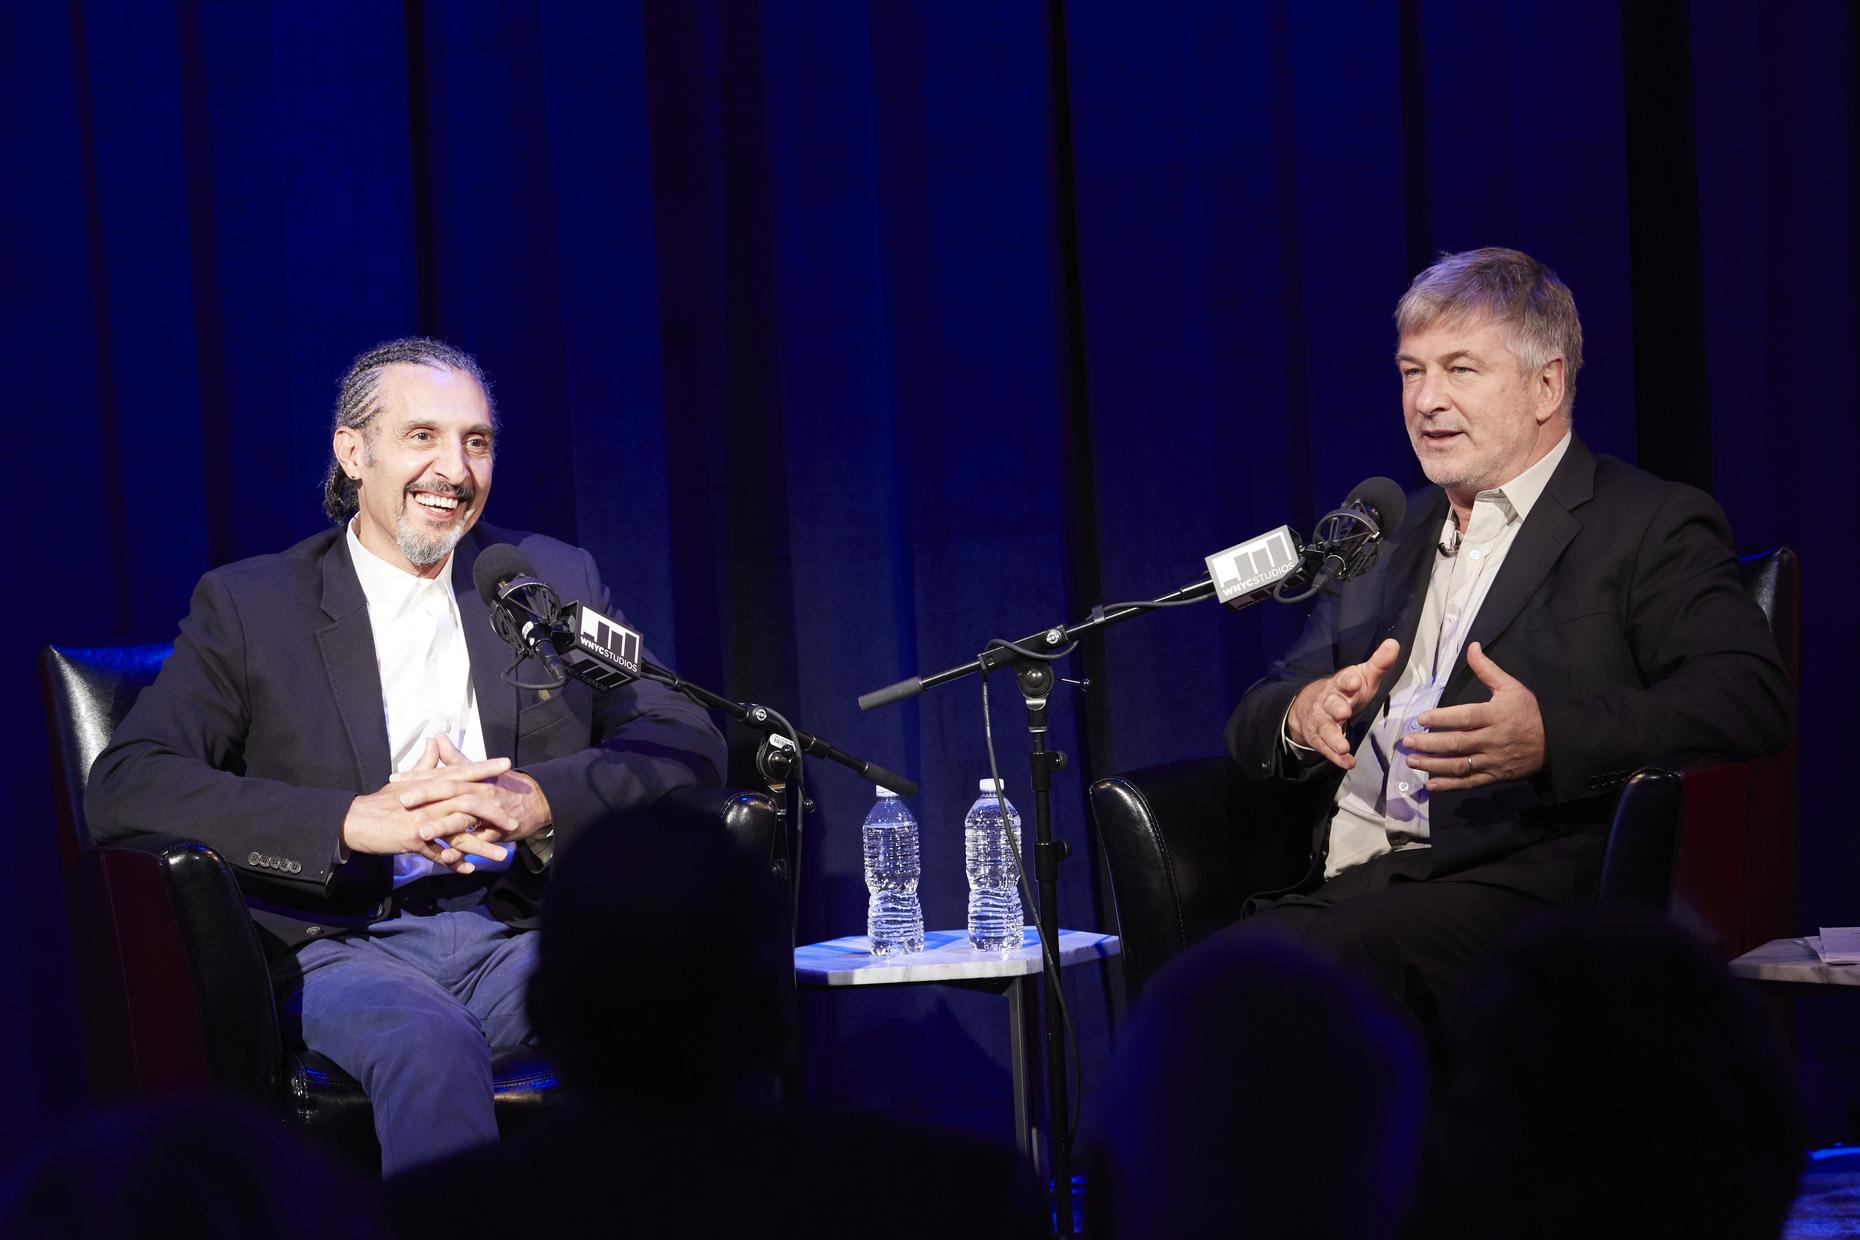 Here’s the Thing: Watch Alec Baldwin in Conversation with John Turturro